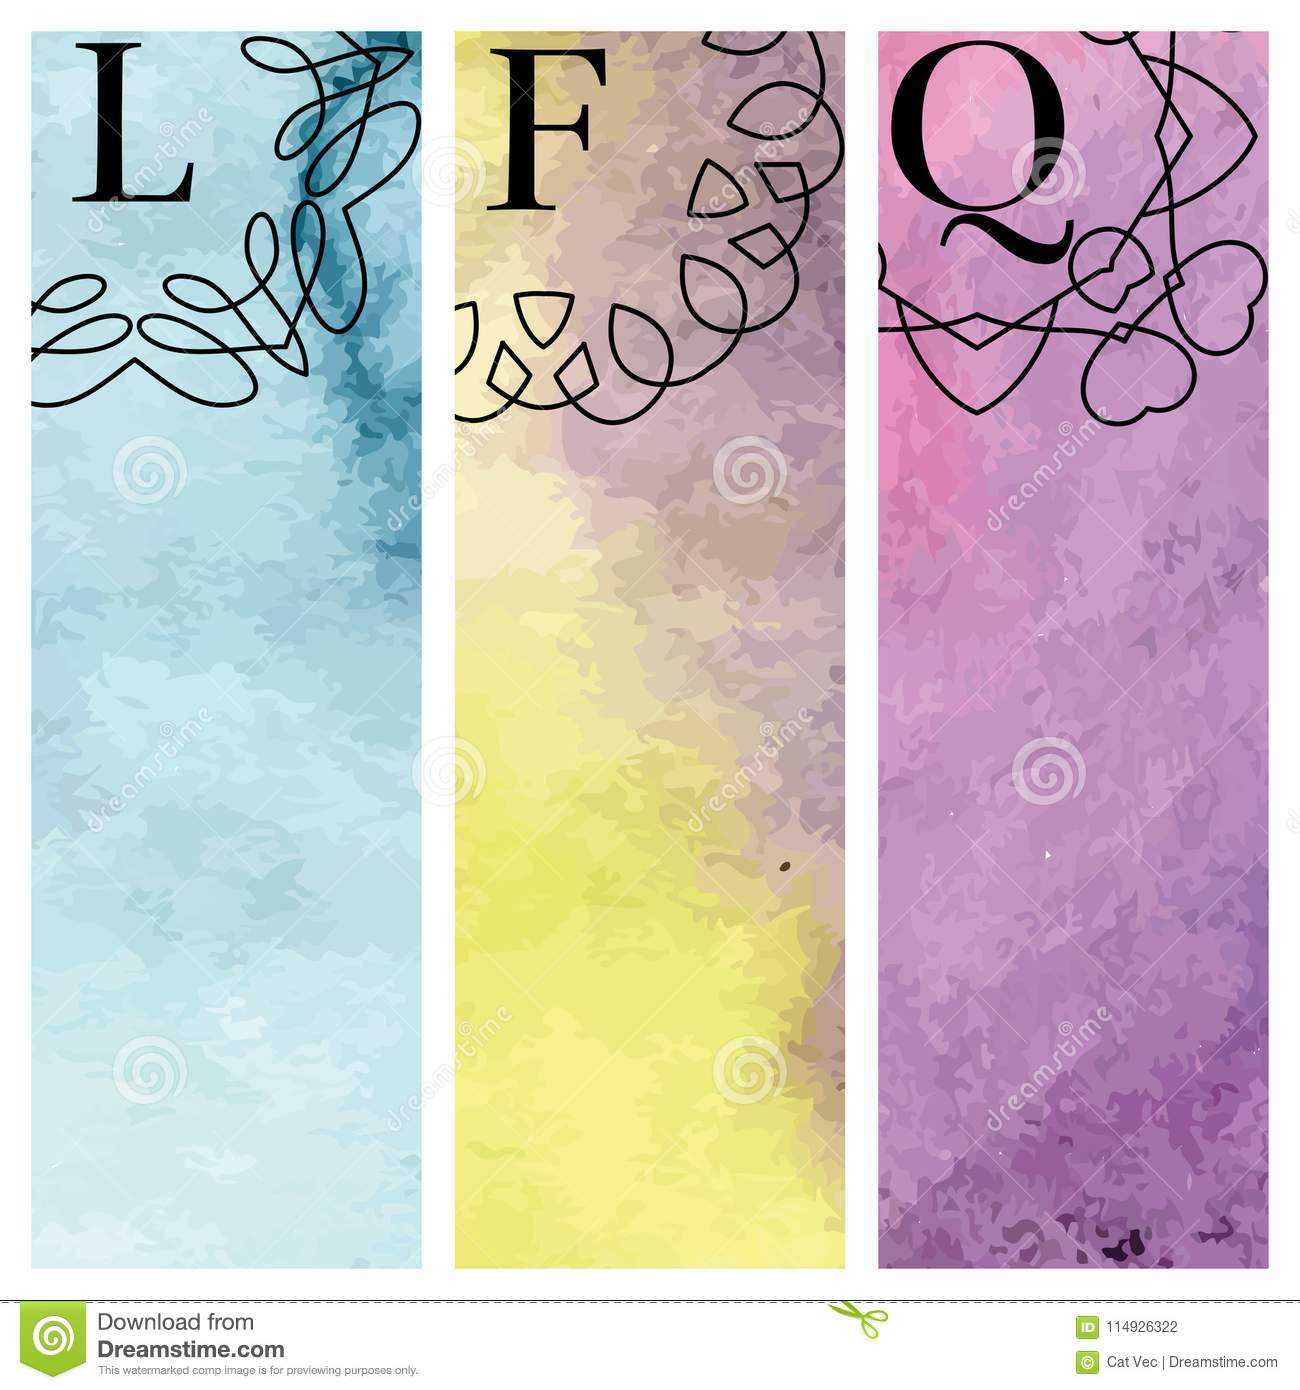 Monogram Template Banners With Flourishes Calligraphic For Letter Templates For Banners